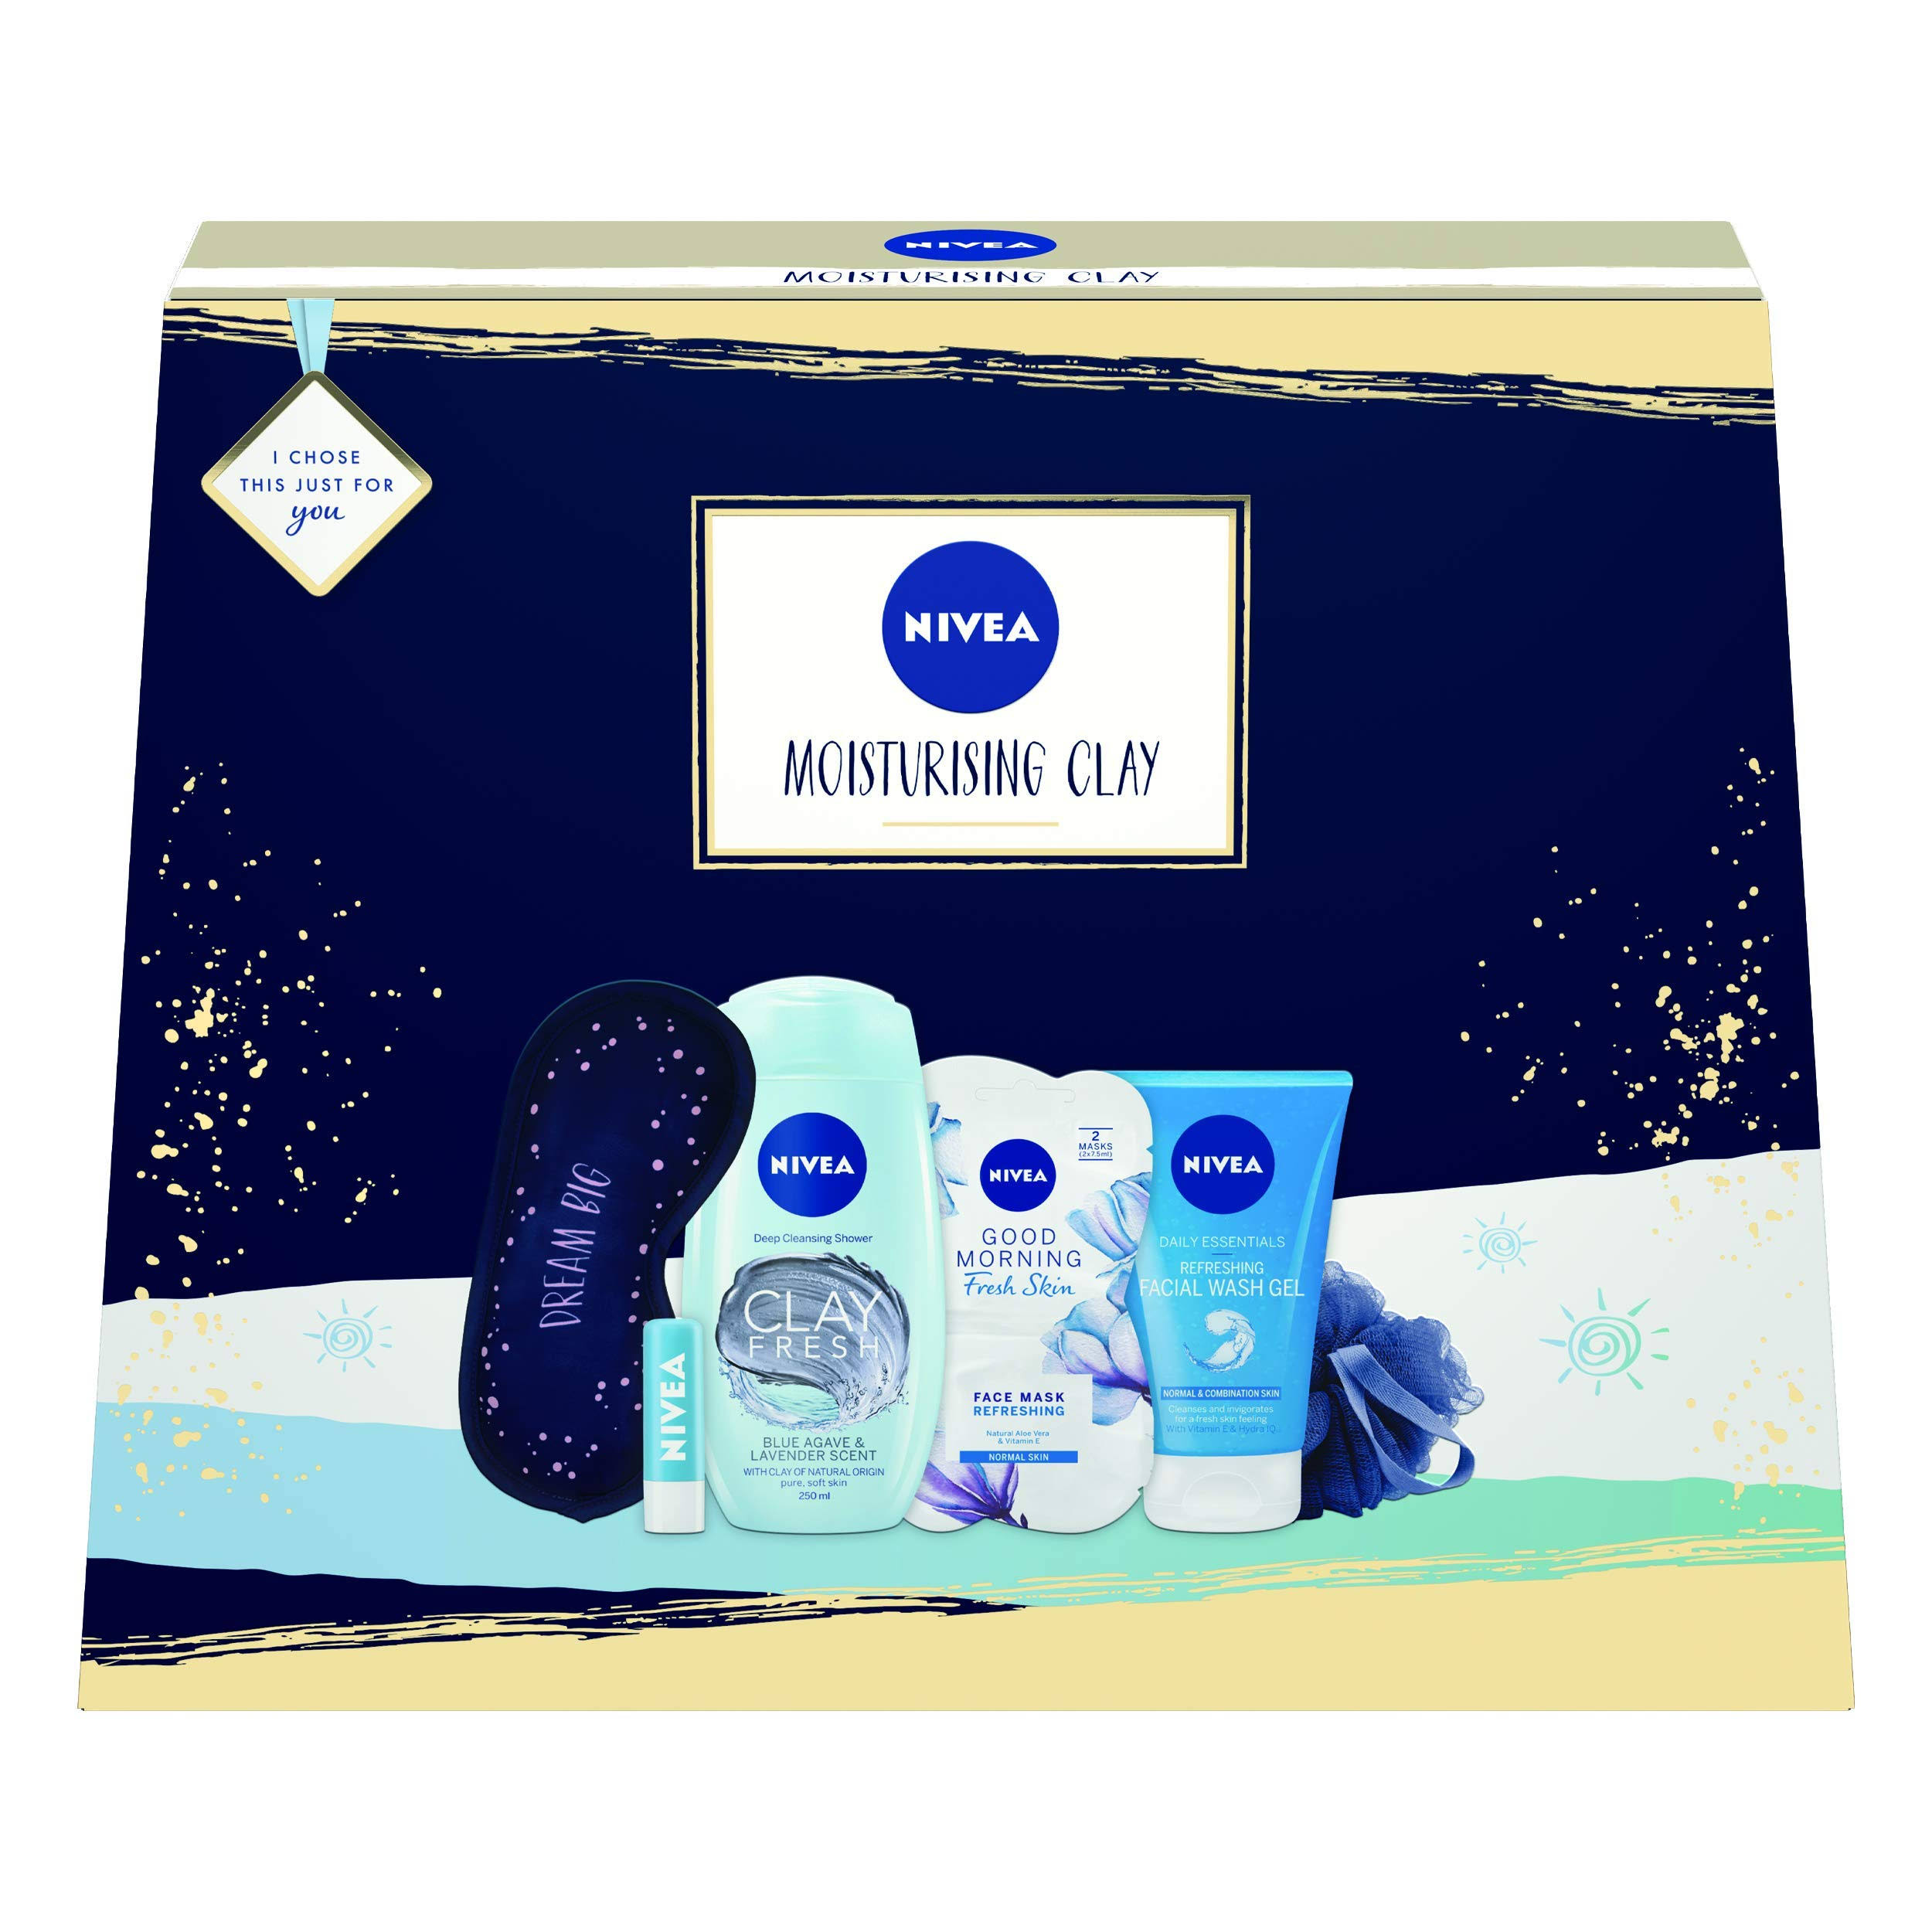 Nivea Moisturising Clay Gift Set, Hydrating Set of Gifts for Her